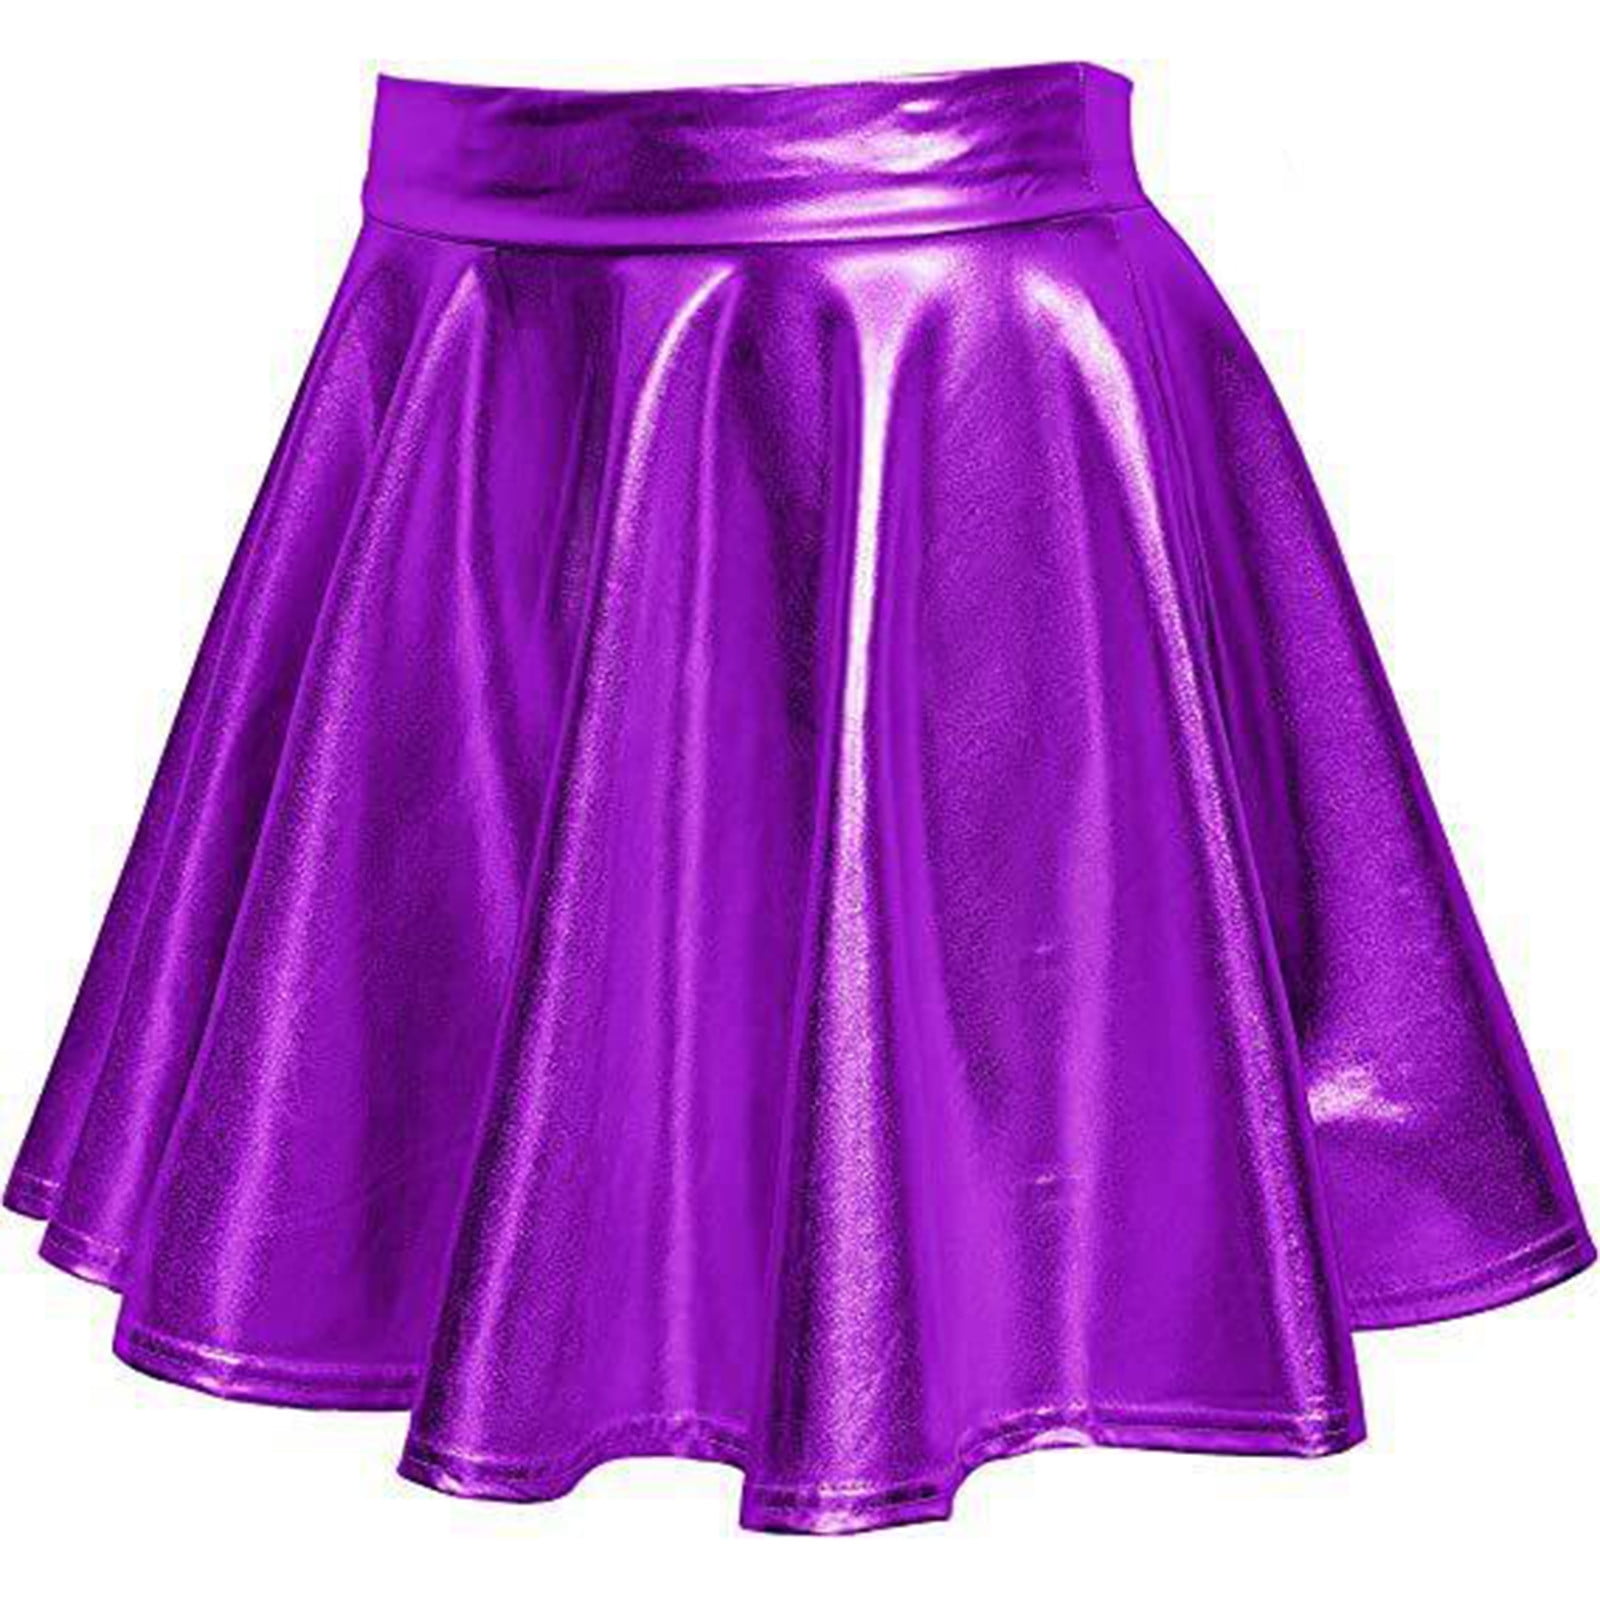 Women's Metallic Shiny Skirt High Waisted Stretchy Pleated Flared A-Line Costume Party Mini Skater Skirts